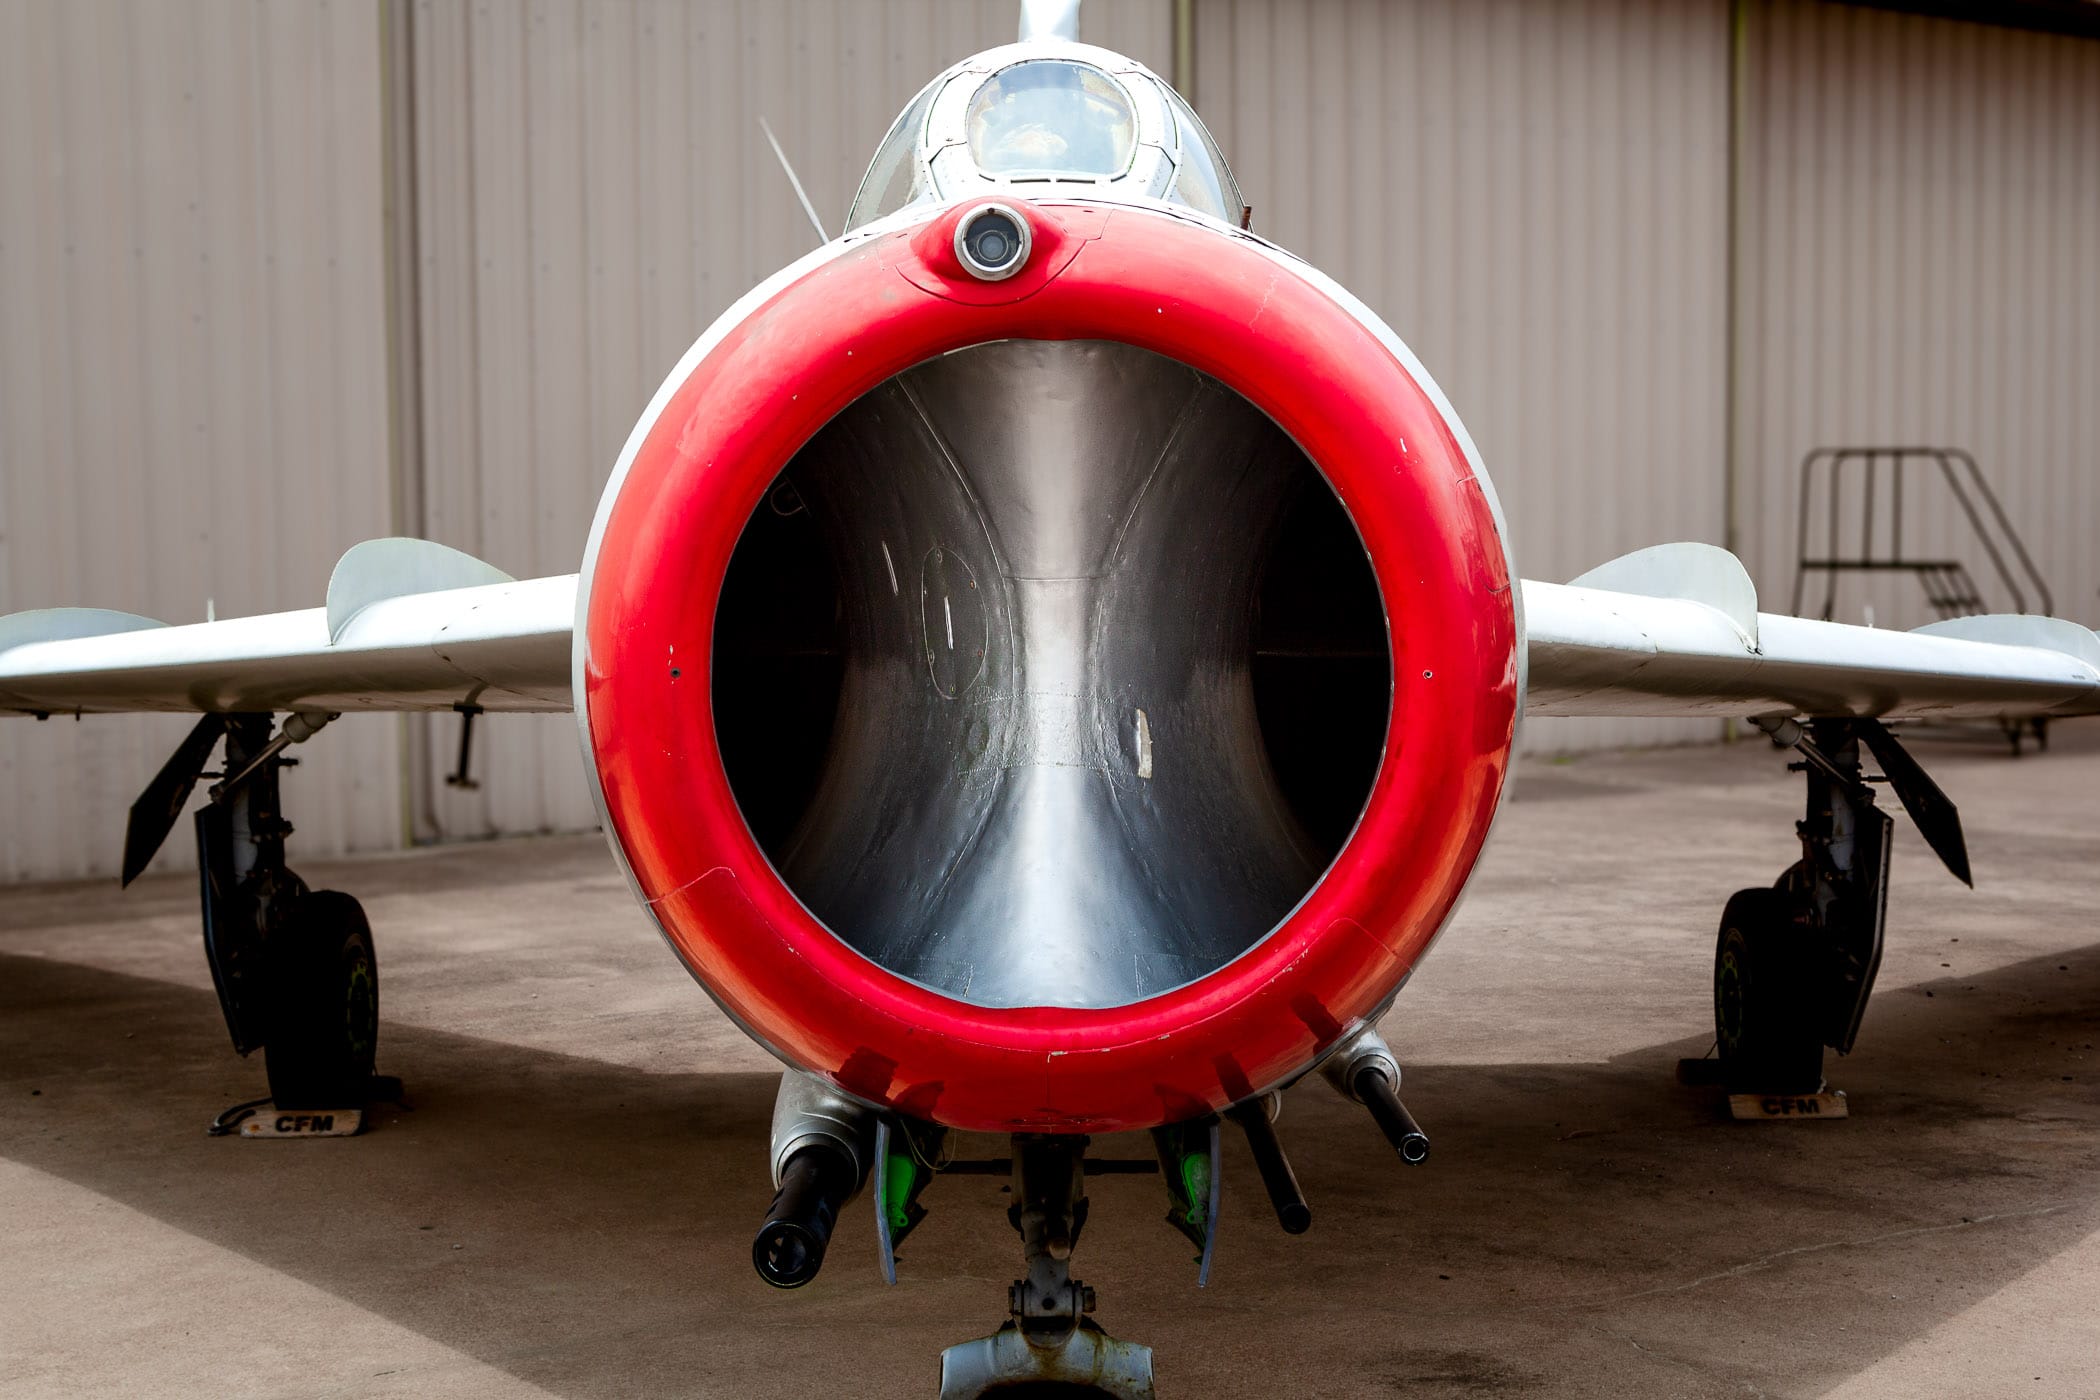 Detail of the engine intake of a Polish-built MiG-17F in the collection of Addison, Texas' Cavanaugh Flight Museum.